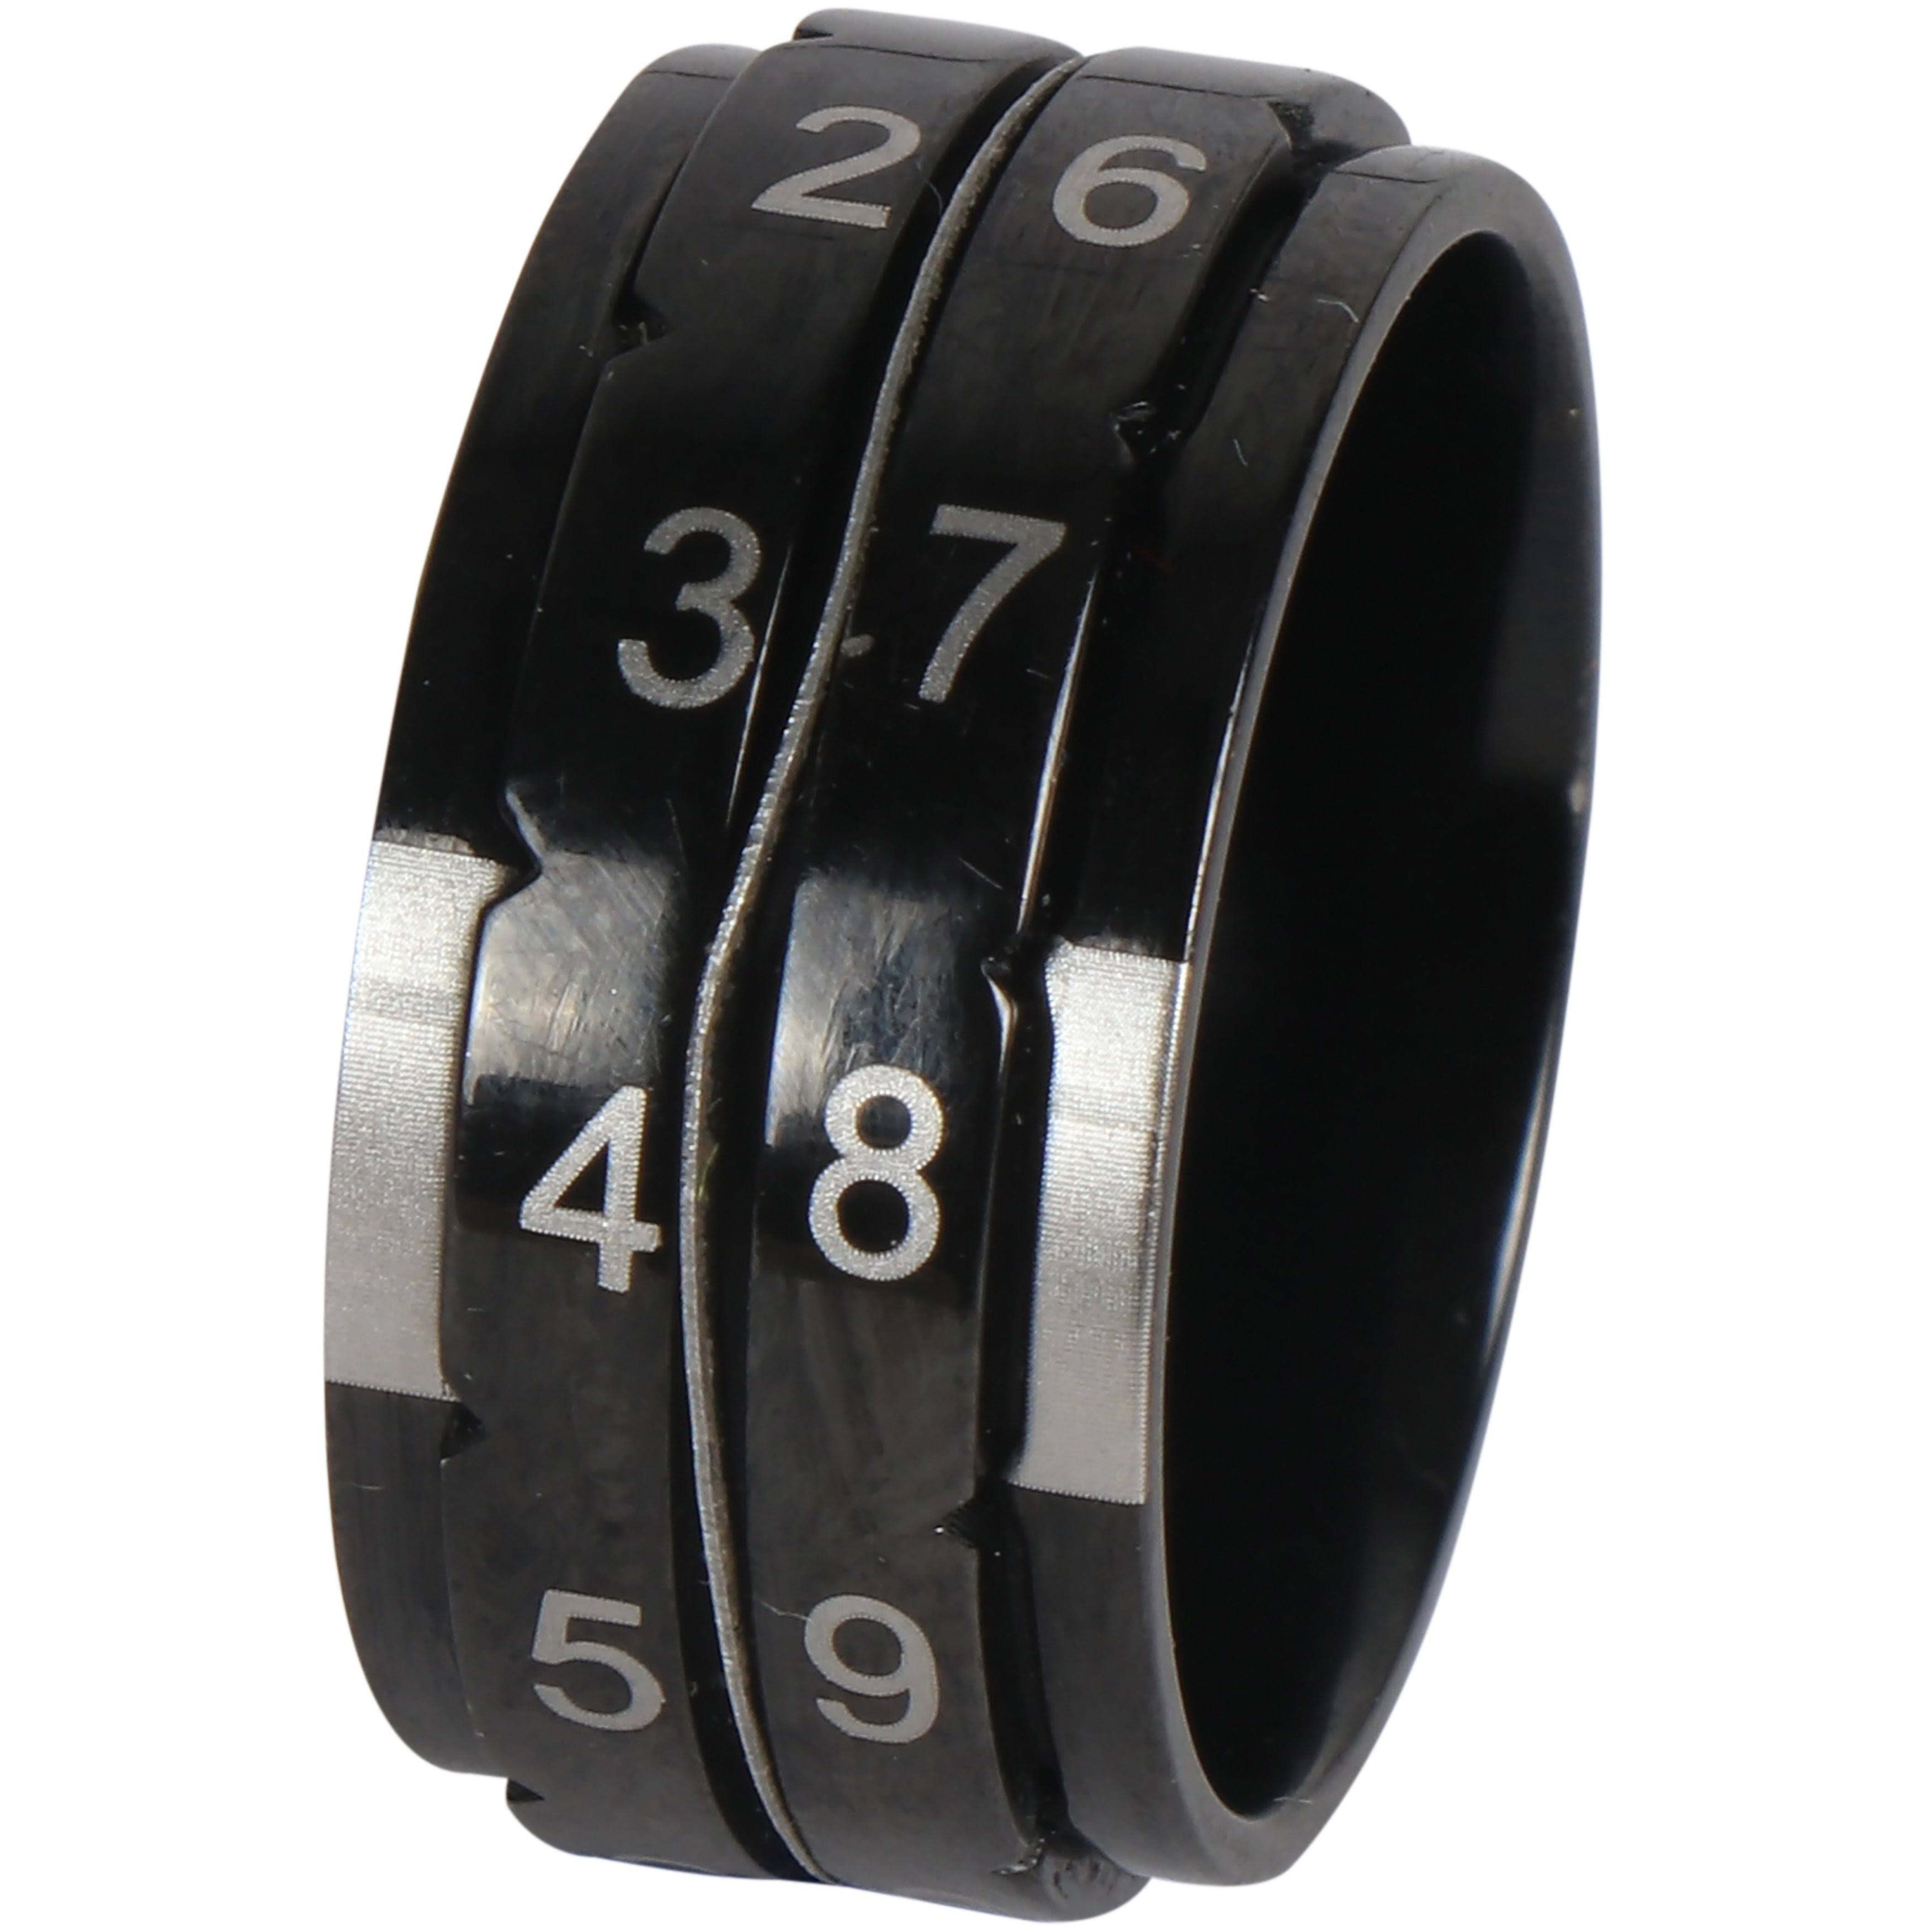 Knitter's Pride Row Counter Ring-Size 7: 17.3mm Diameter